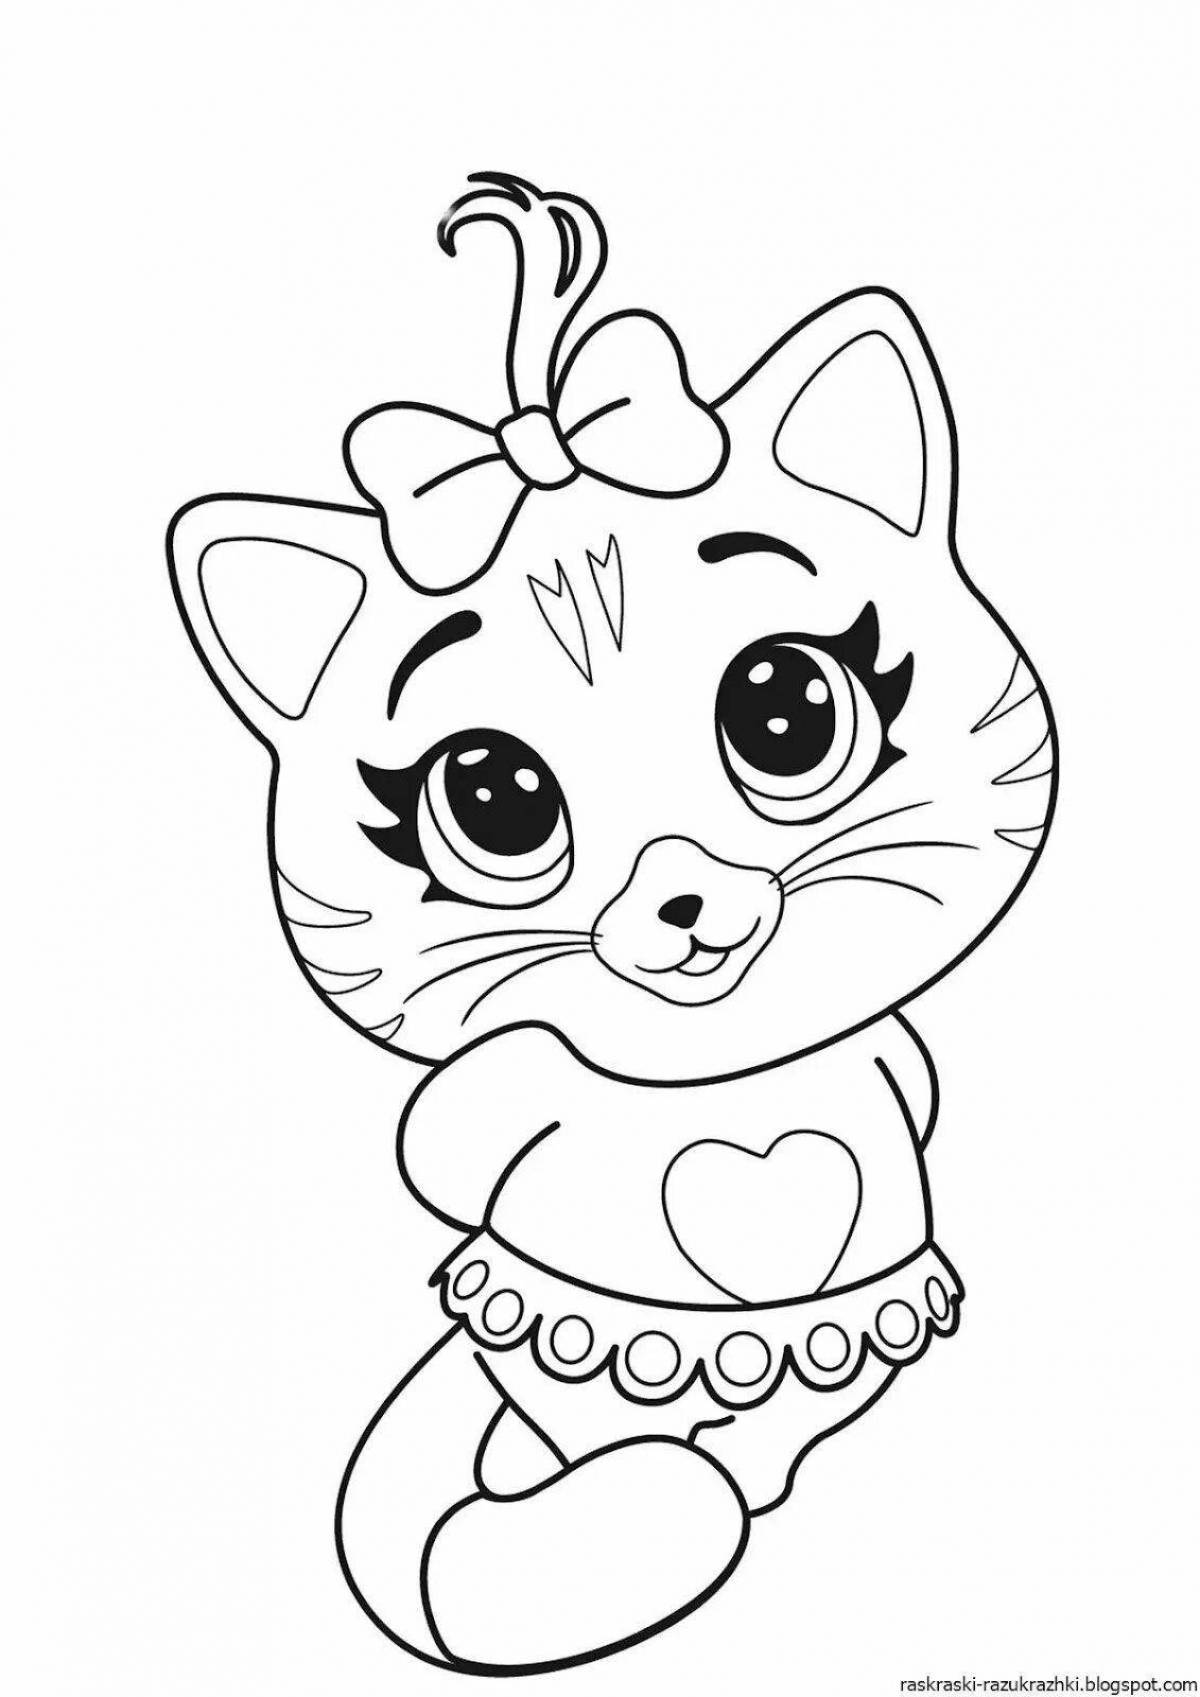 Exquisite kitten coloring book for 5-6 year olds